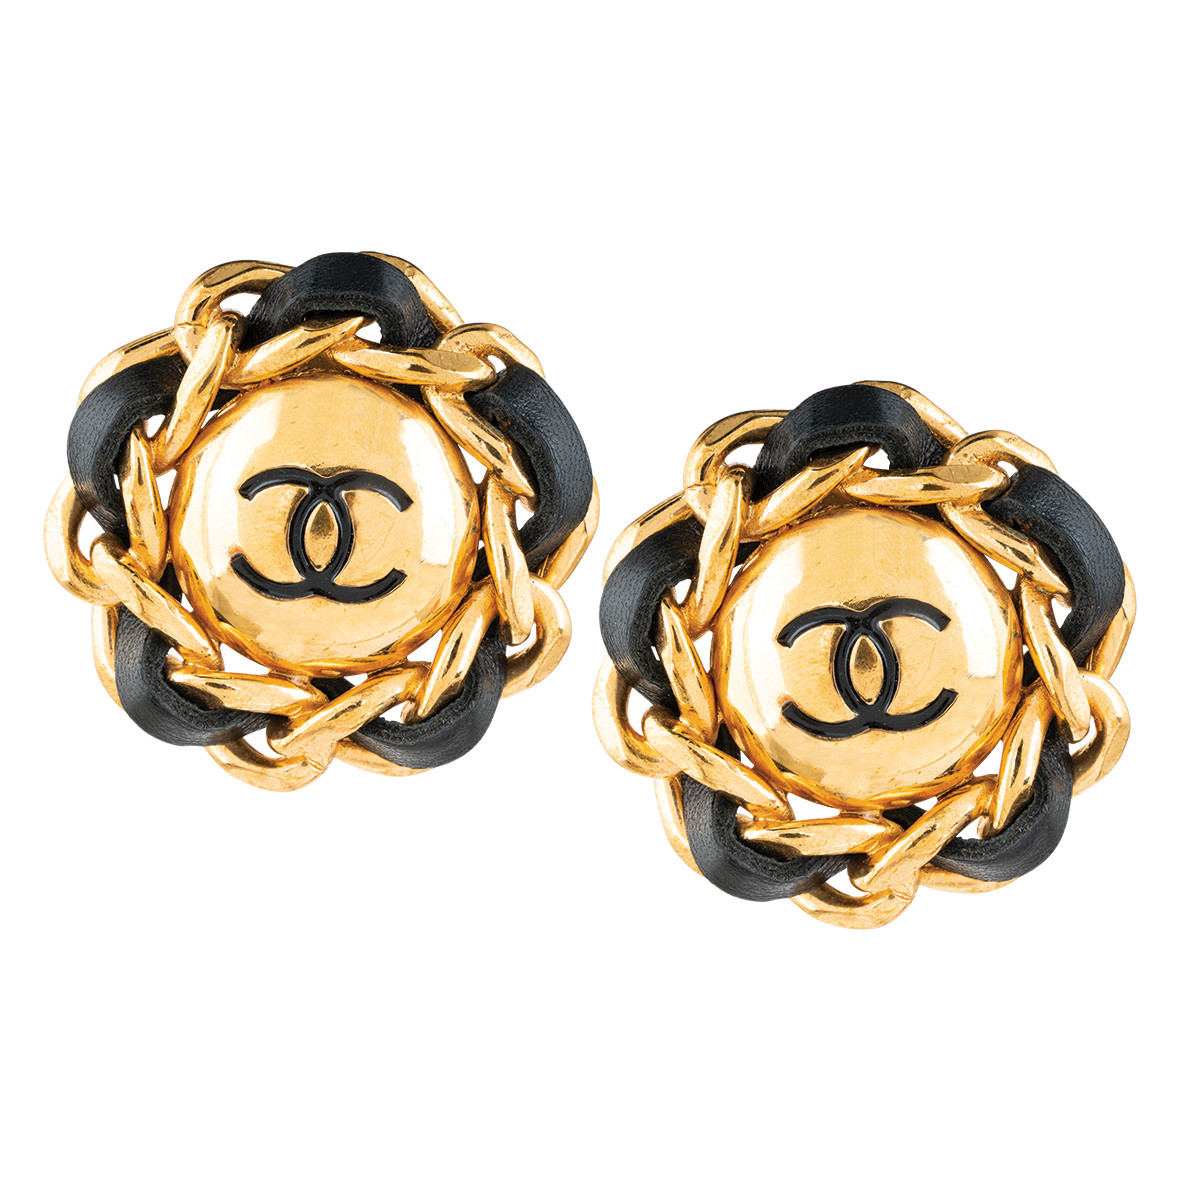 Vintage Chanel earring • fashion accessories